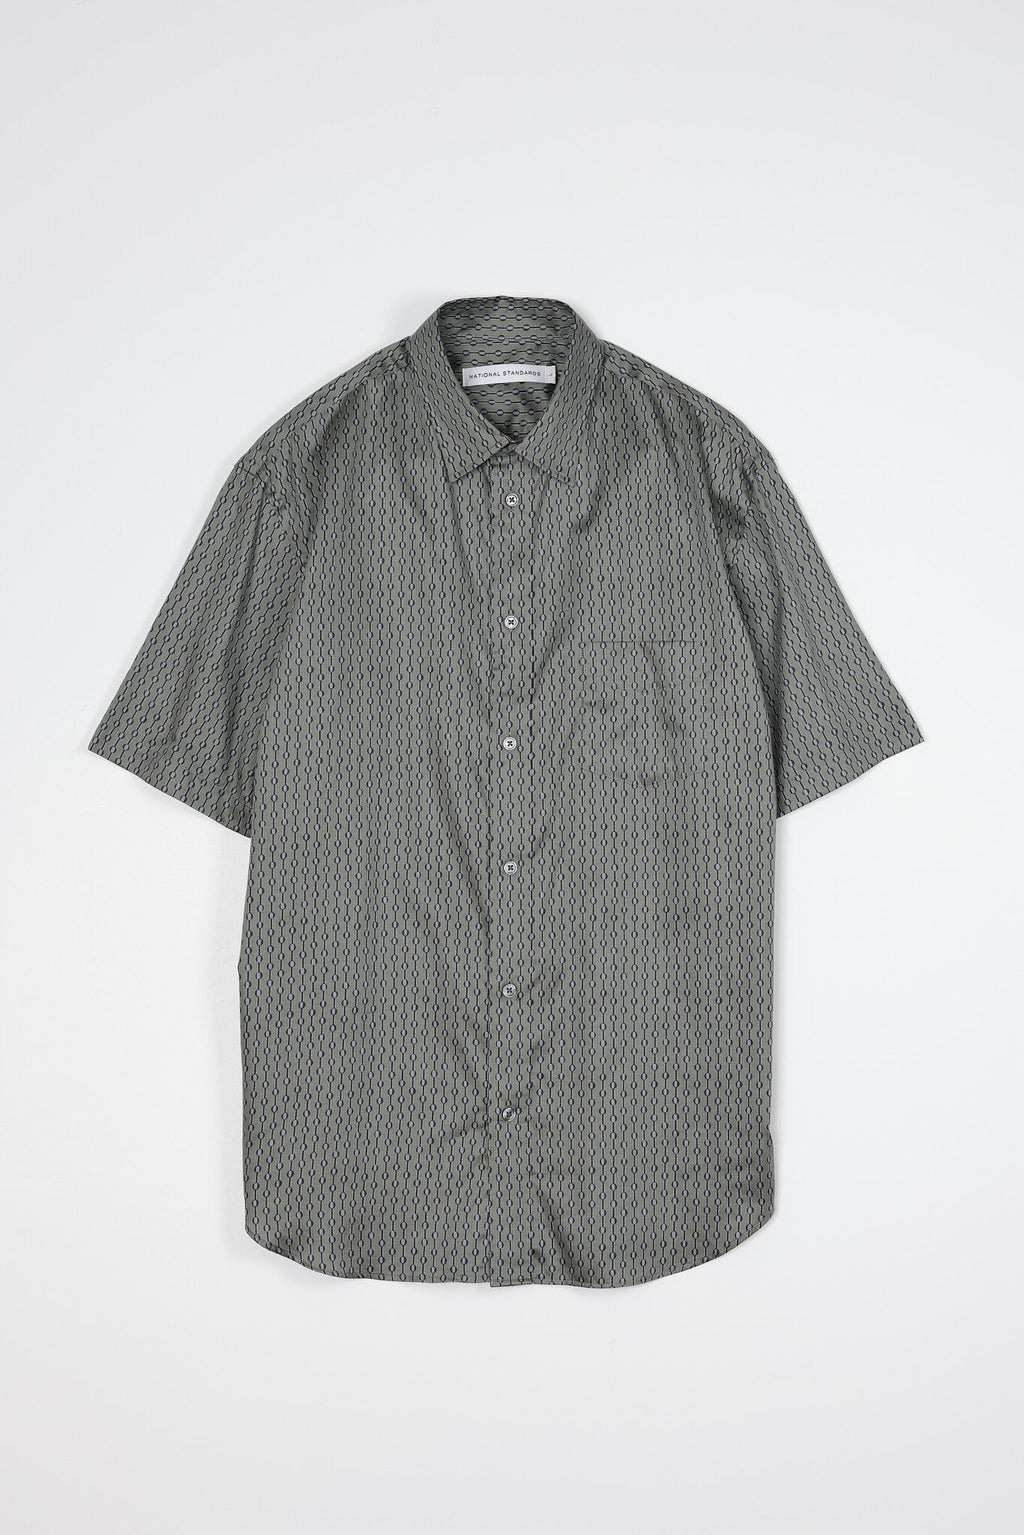 Japanese Dotted Stripe Print in Green 01